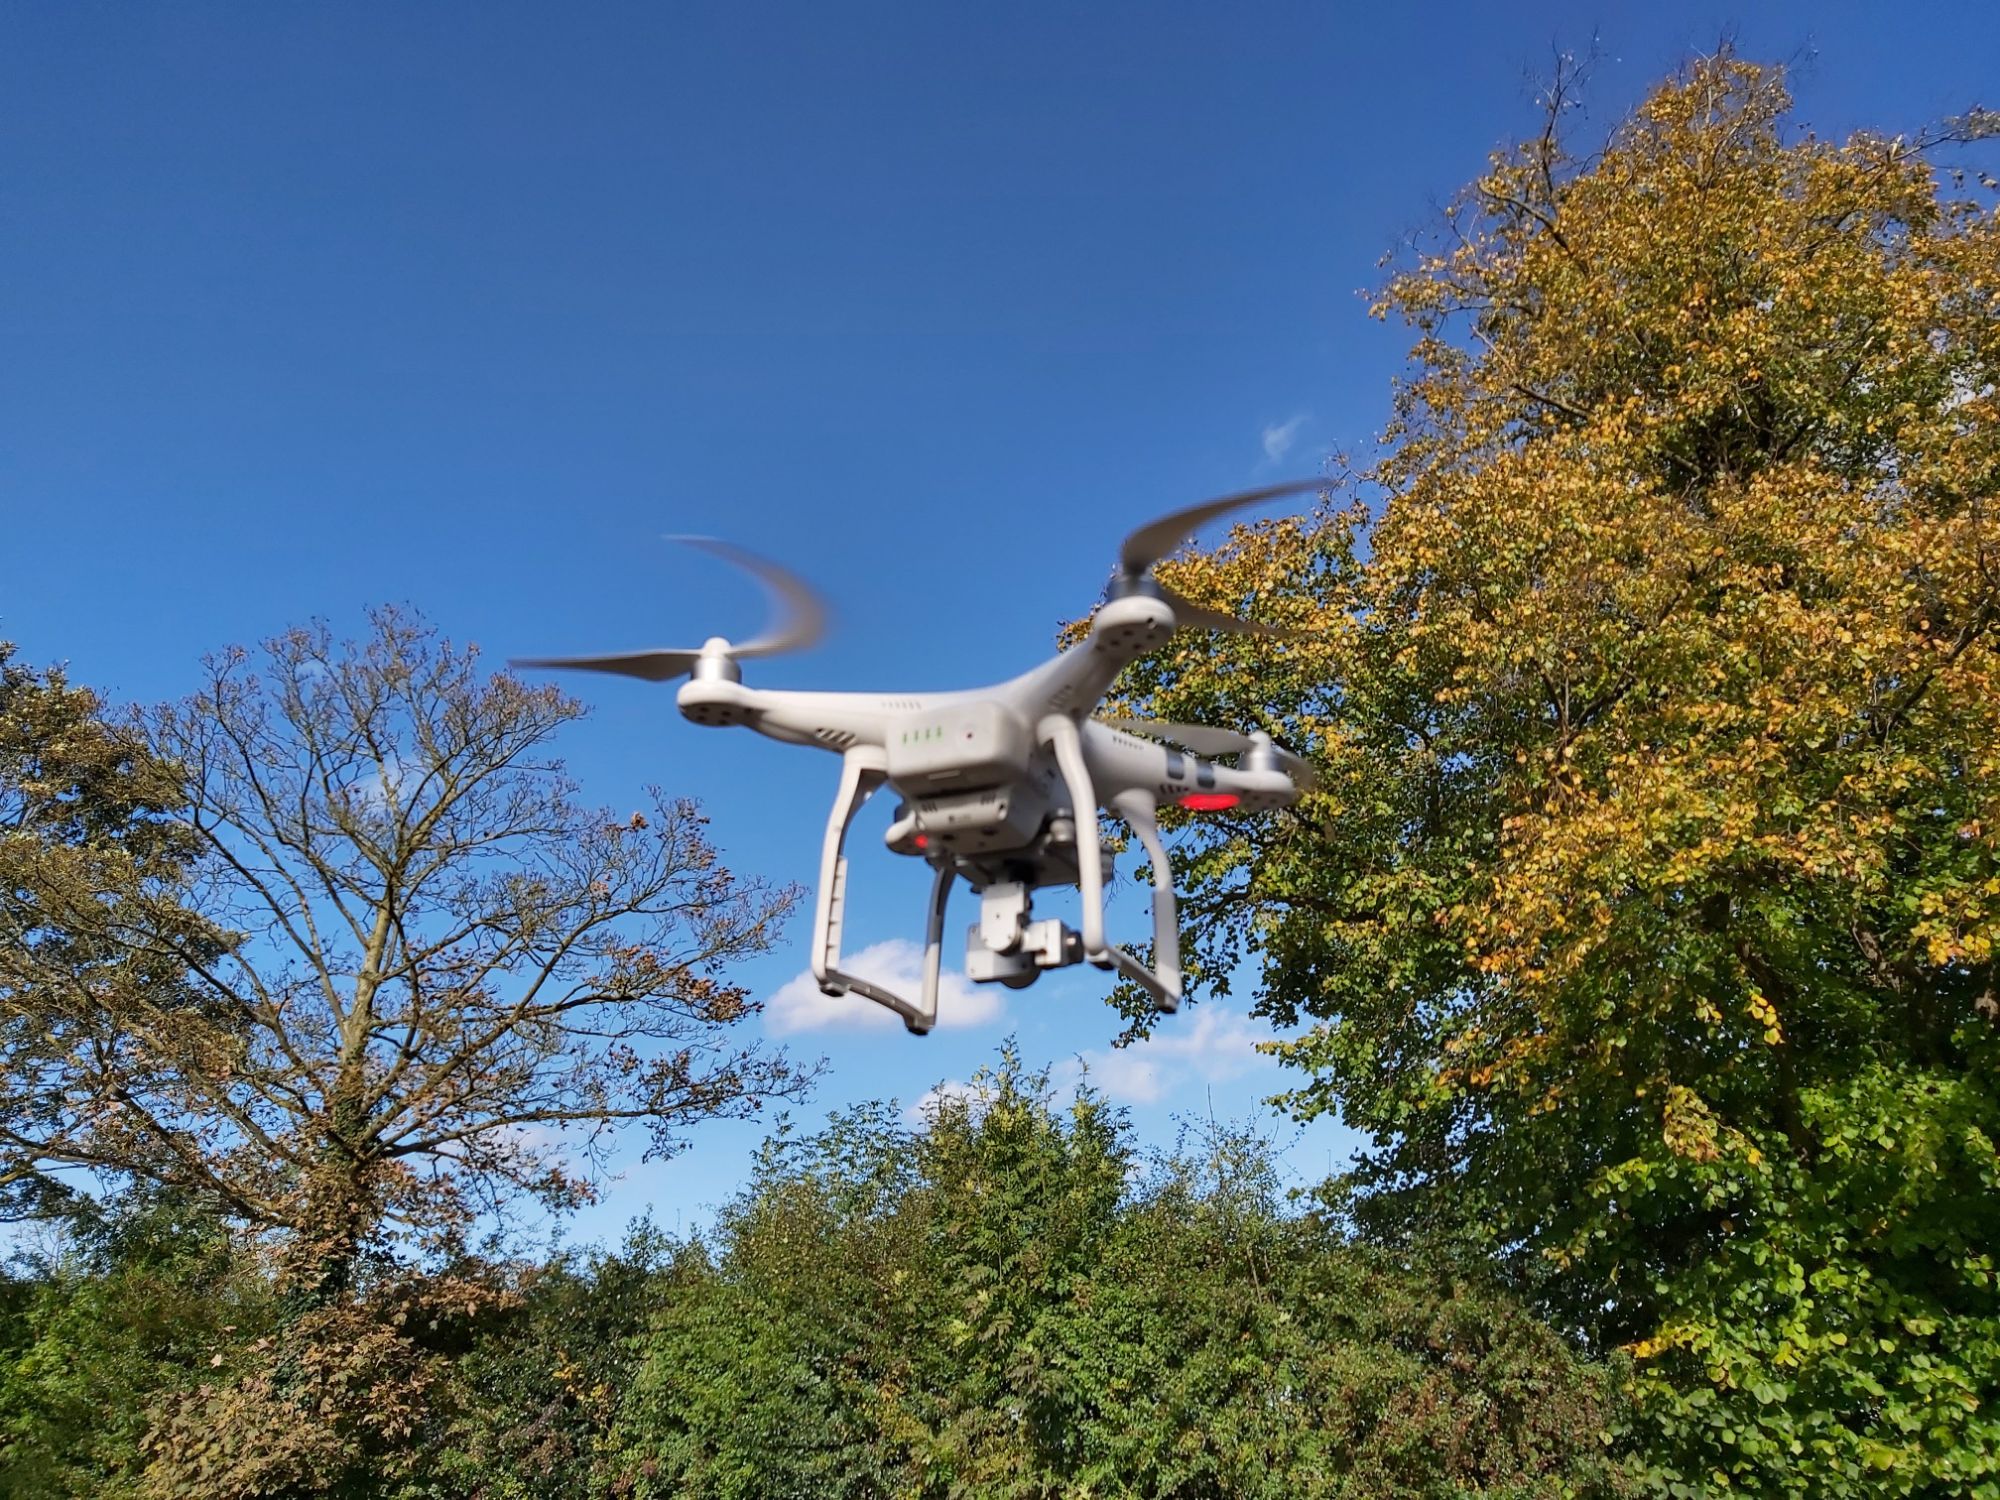 Drone to take aerial photography to support planning applications